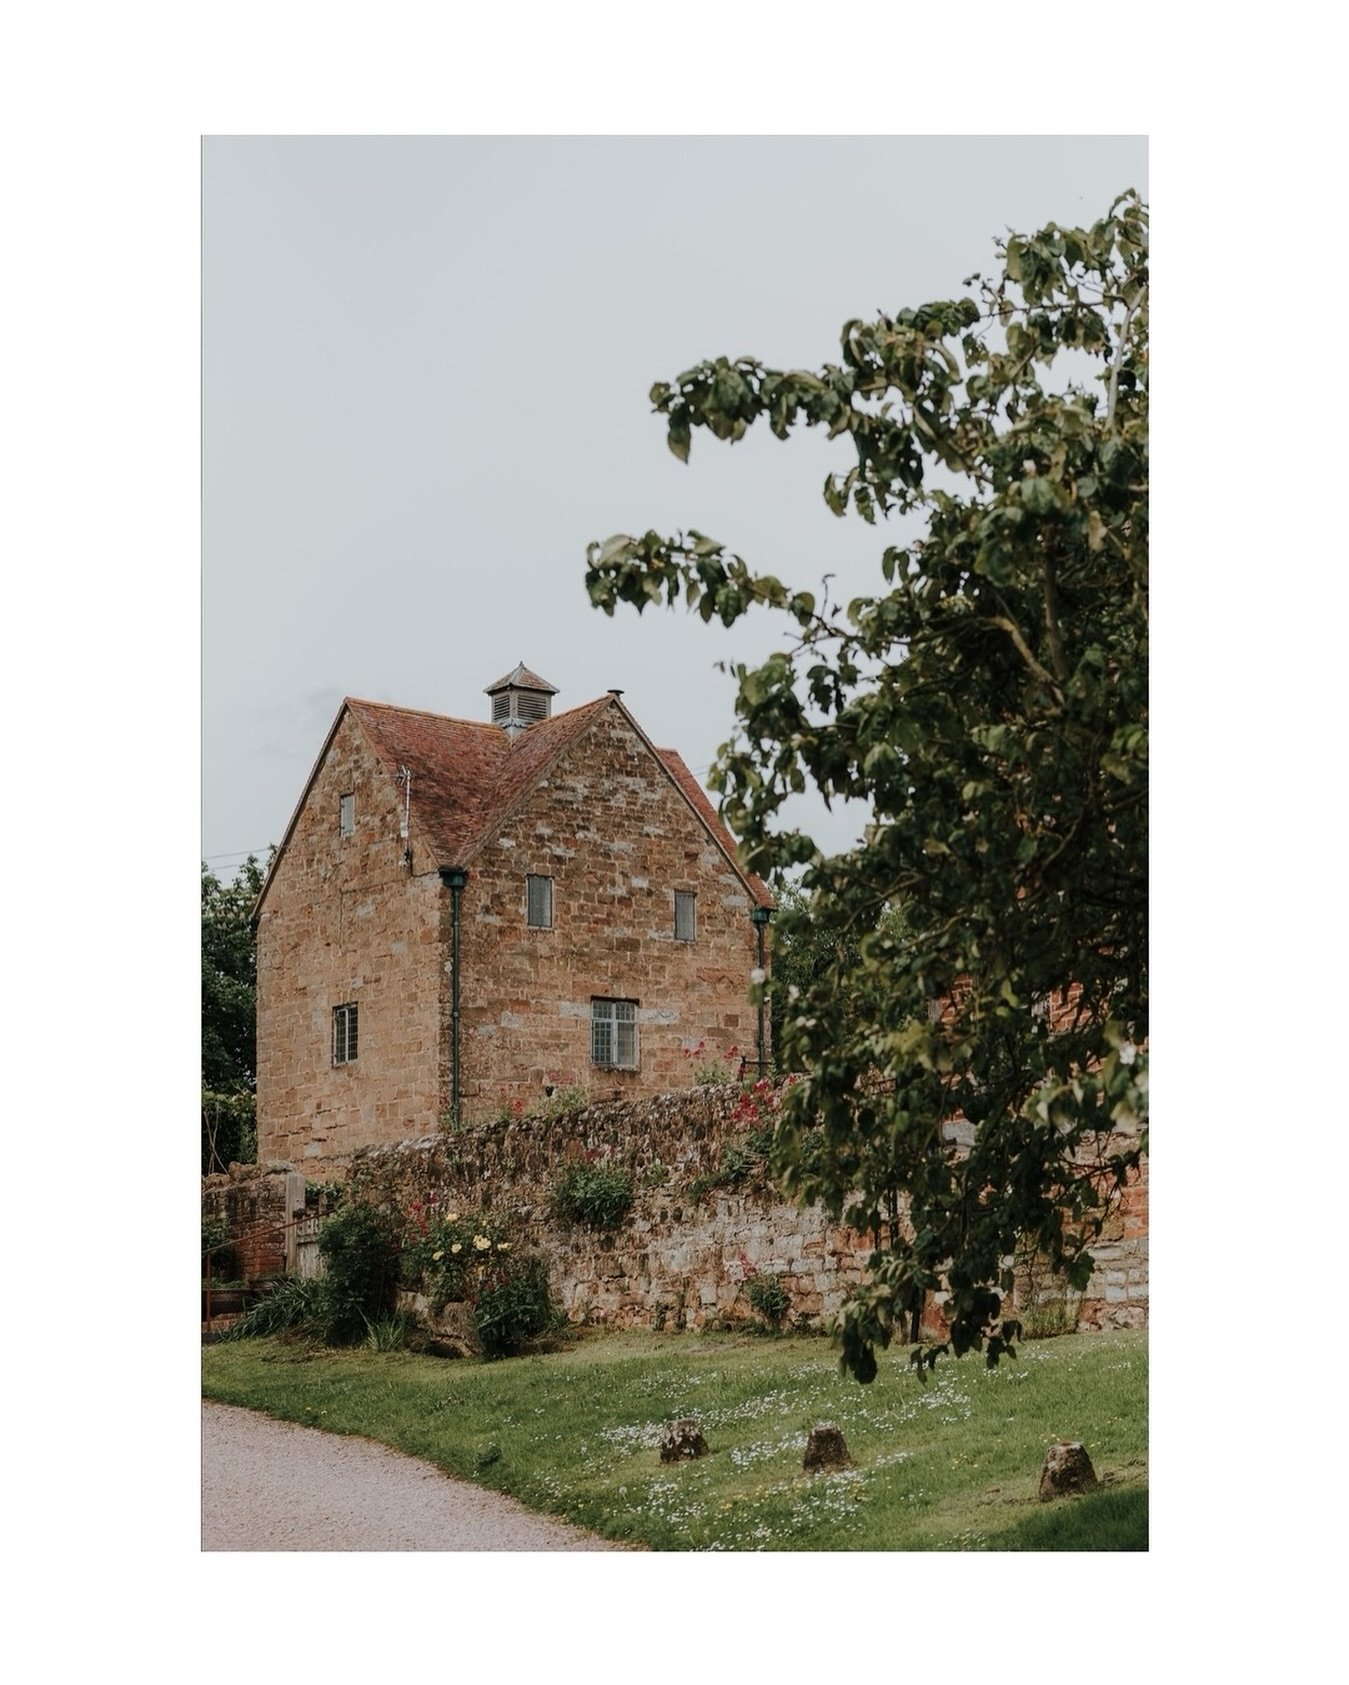 I&rsquo;ve been visiting some very special places for @fablefaine lately - creating my dream job travelling the UK photographing places of historic and natural interest and then matching them up with the creators that love them like I do. Weaving the